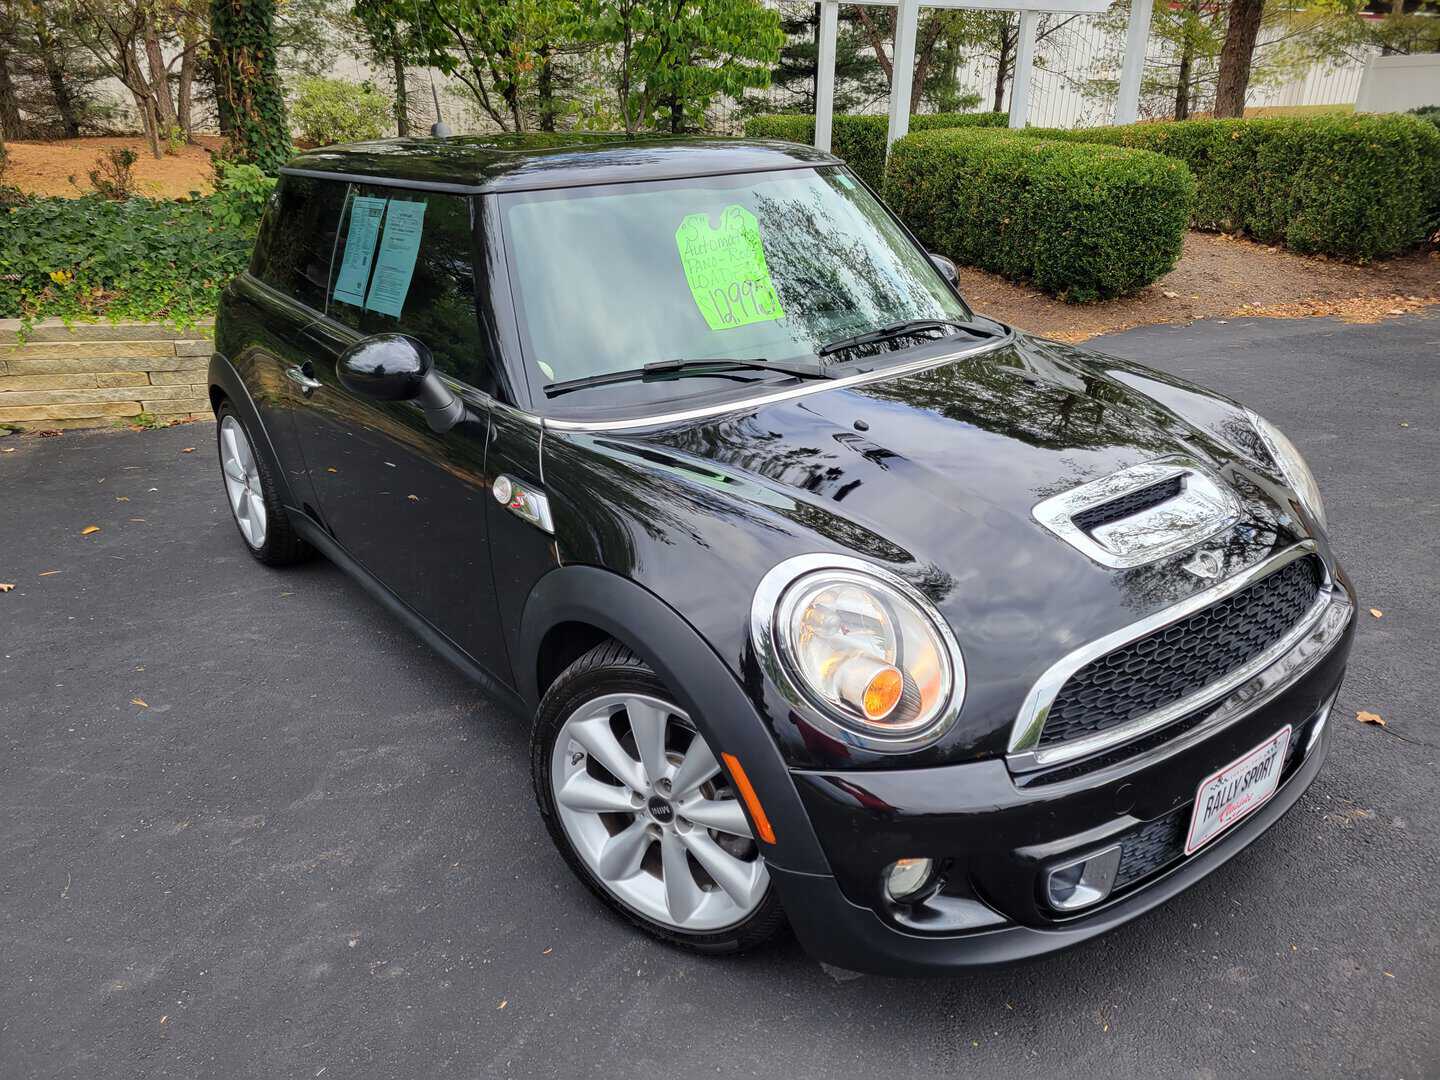 A 2013 black Mini Cooper is parked in a parking lot.